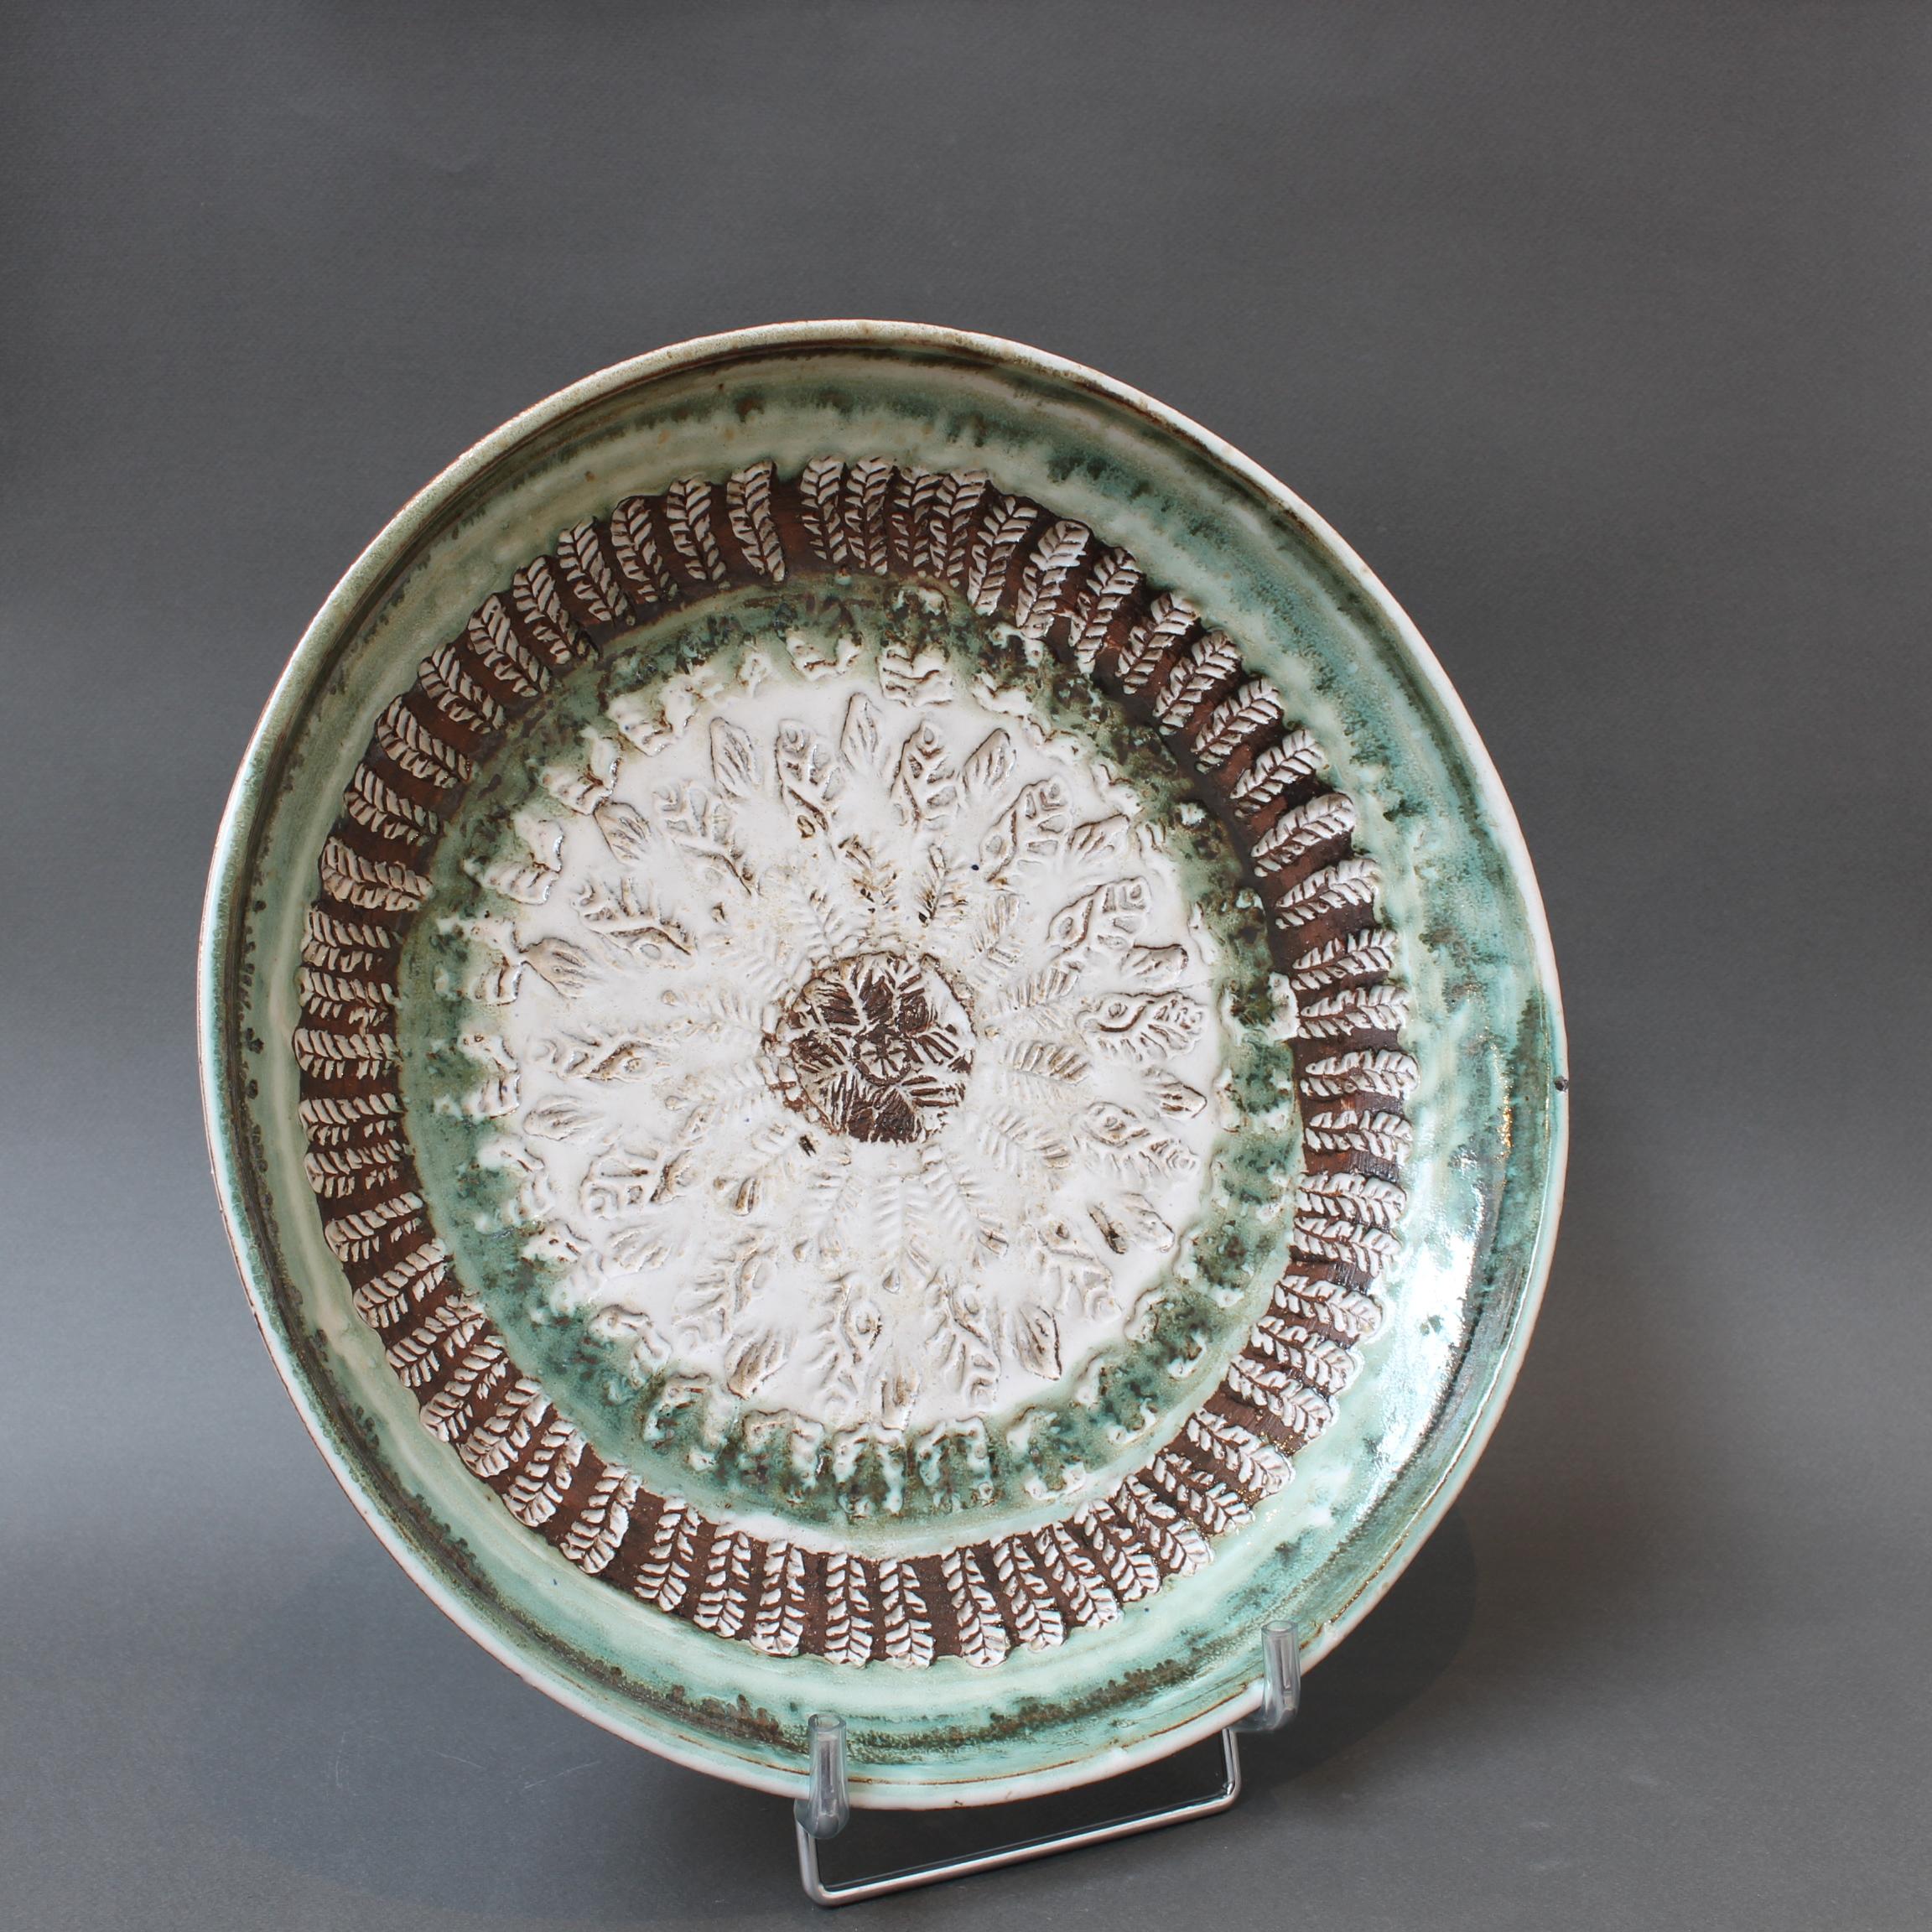 Mid-century decorative platter (circa 1960s) by Albert Thiry. A large sunflower springs to mind looking at the platter. Both visually stunning and tactile at the same time, the deeply engraved motif with its various patterns bring the whole